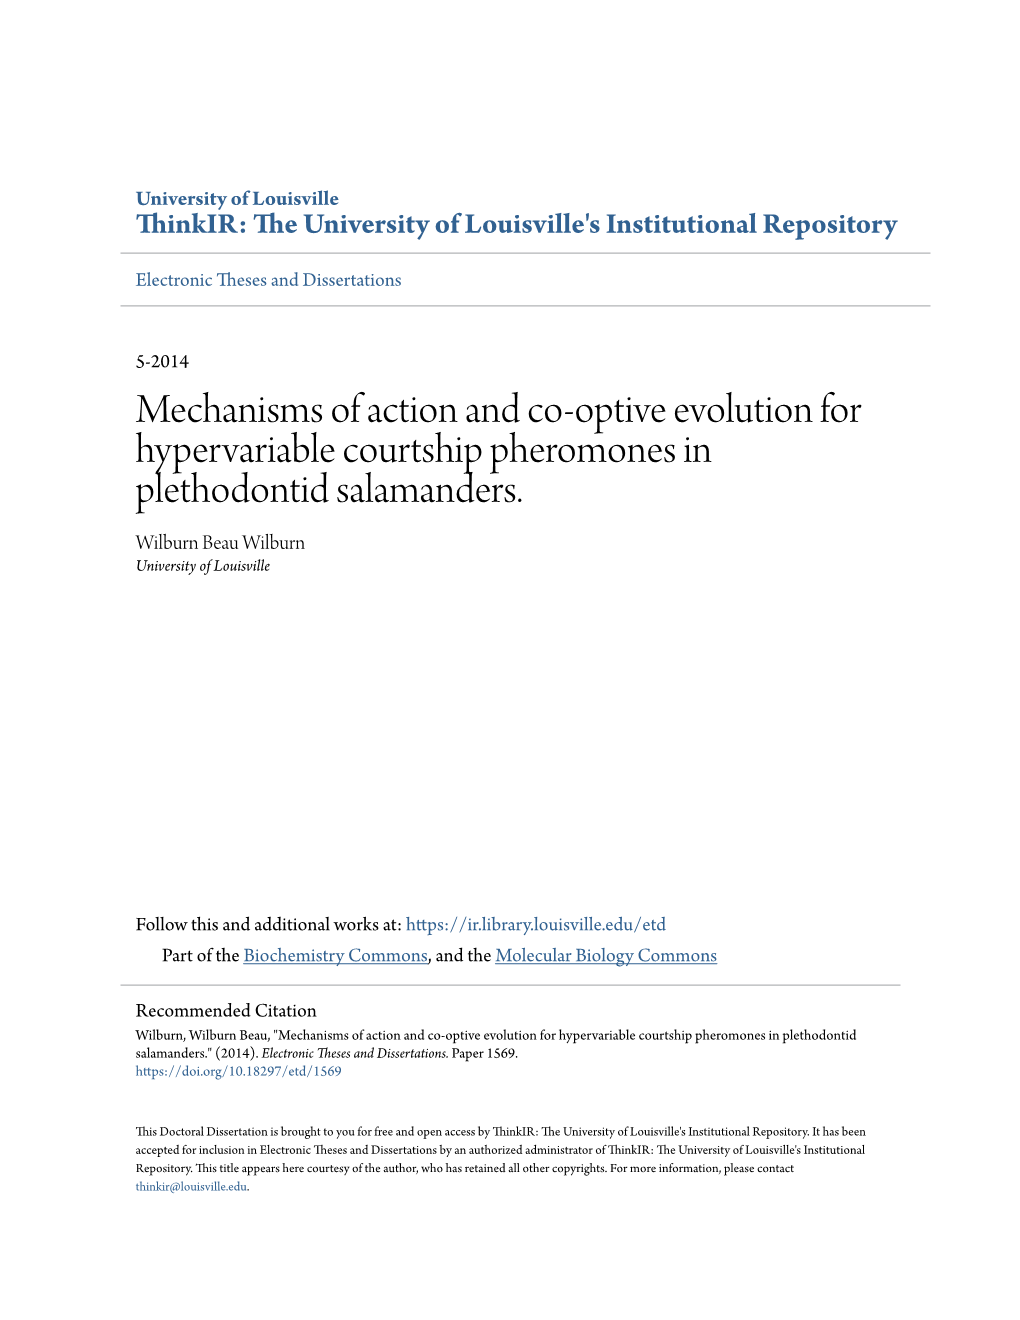 Mechanisms of Action and Co-Optive Evolution for Hypervariable Courtship Pheromones in Plethodontid Salamanders